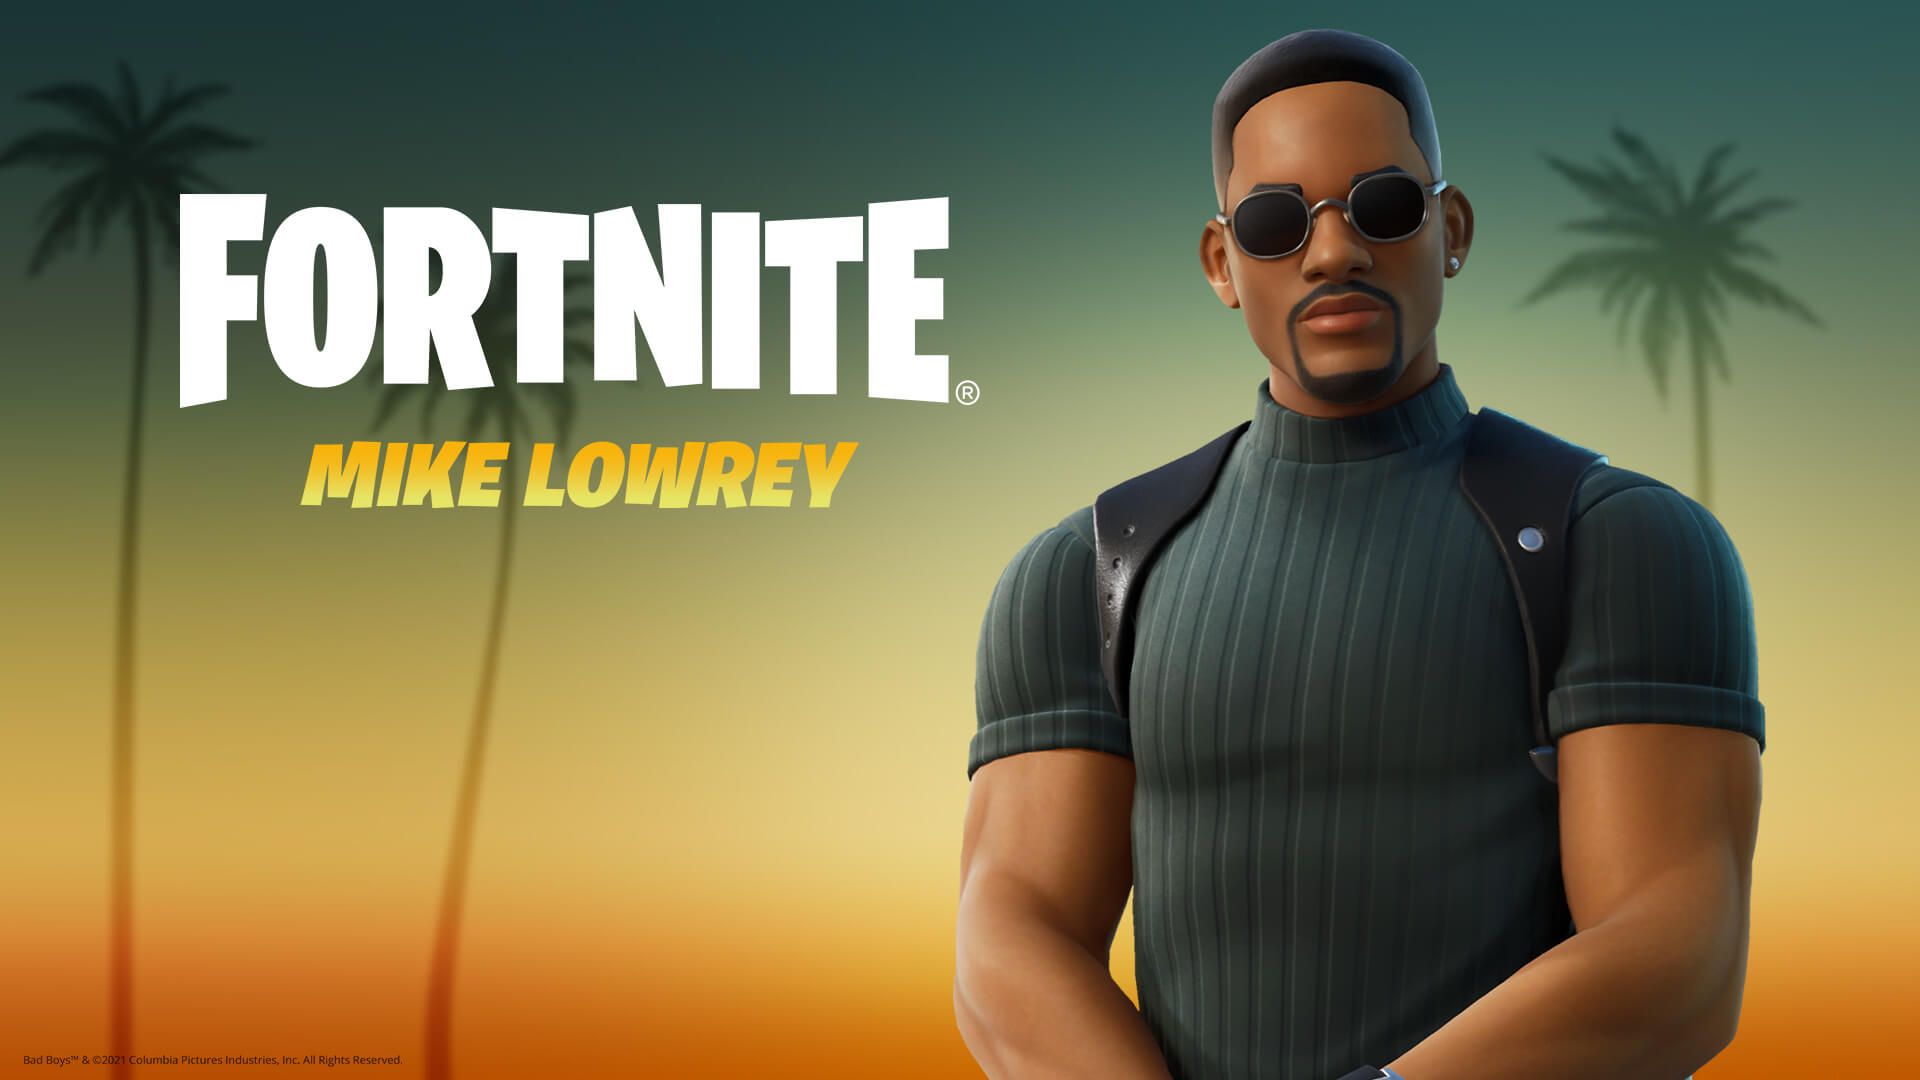 Fortnite Adds Will Smith Character Mike Lowrey From Bad Boys